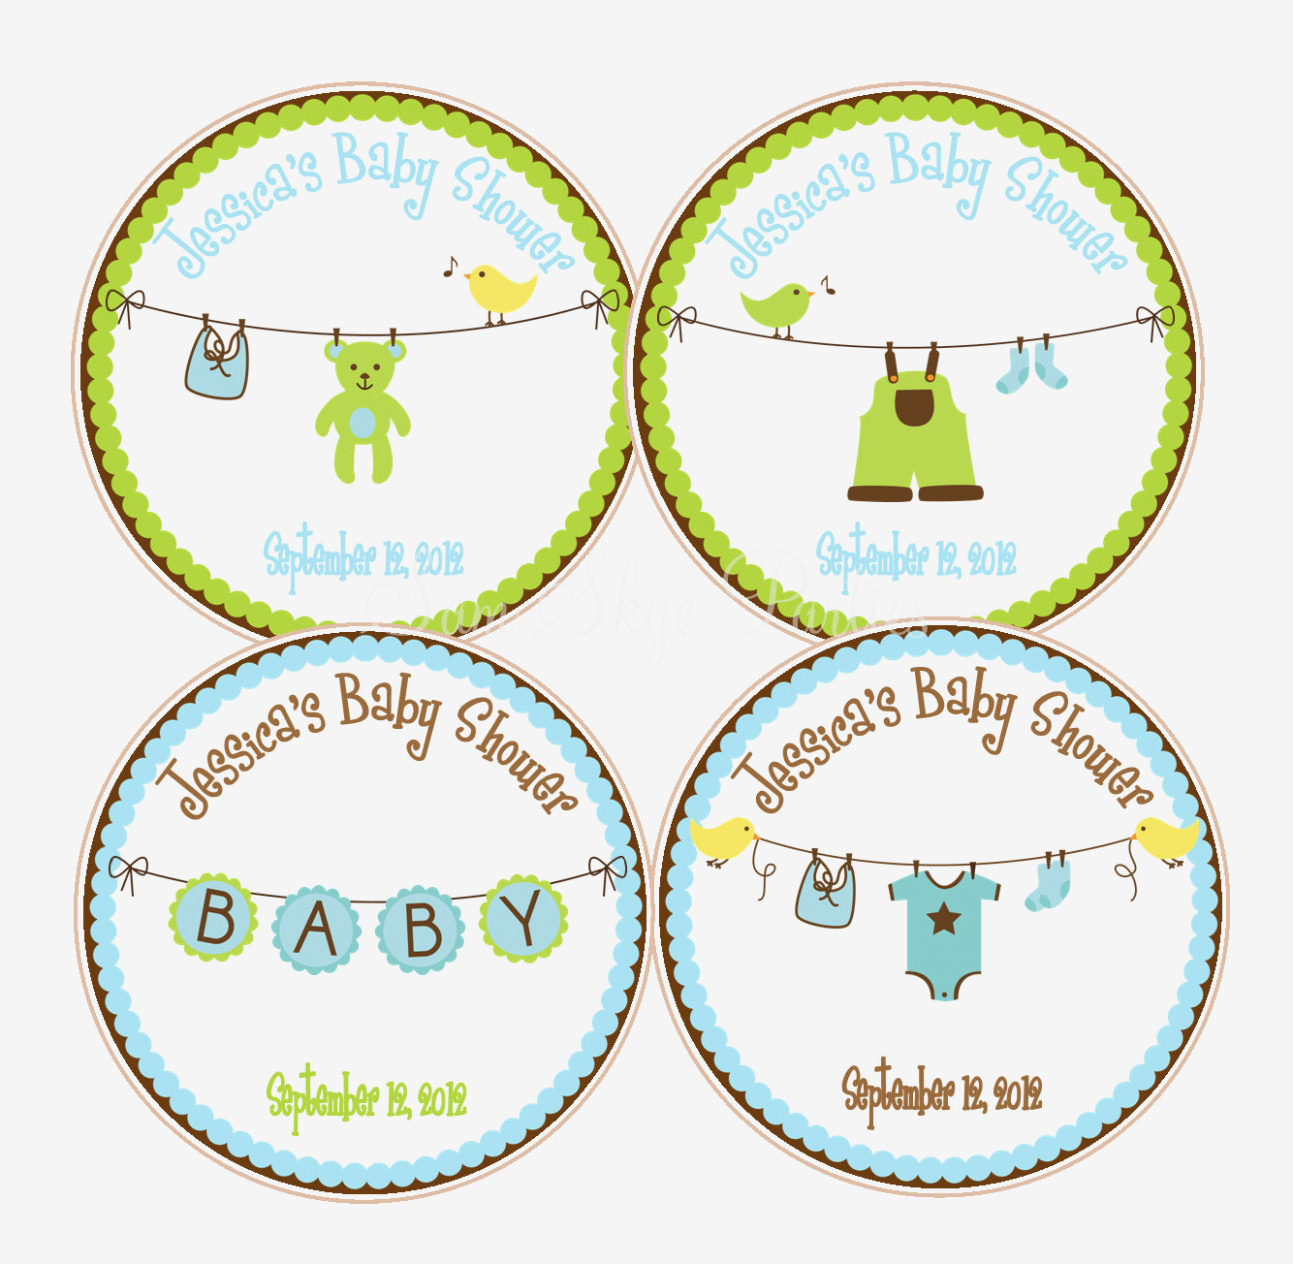 Baby Shower Labels Templates Favor Wording Label Ideas Tags Diy Free - Free Printable Baby Shower Favor Tags